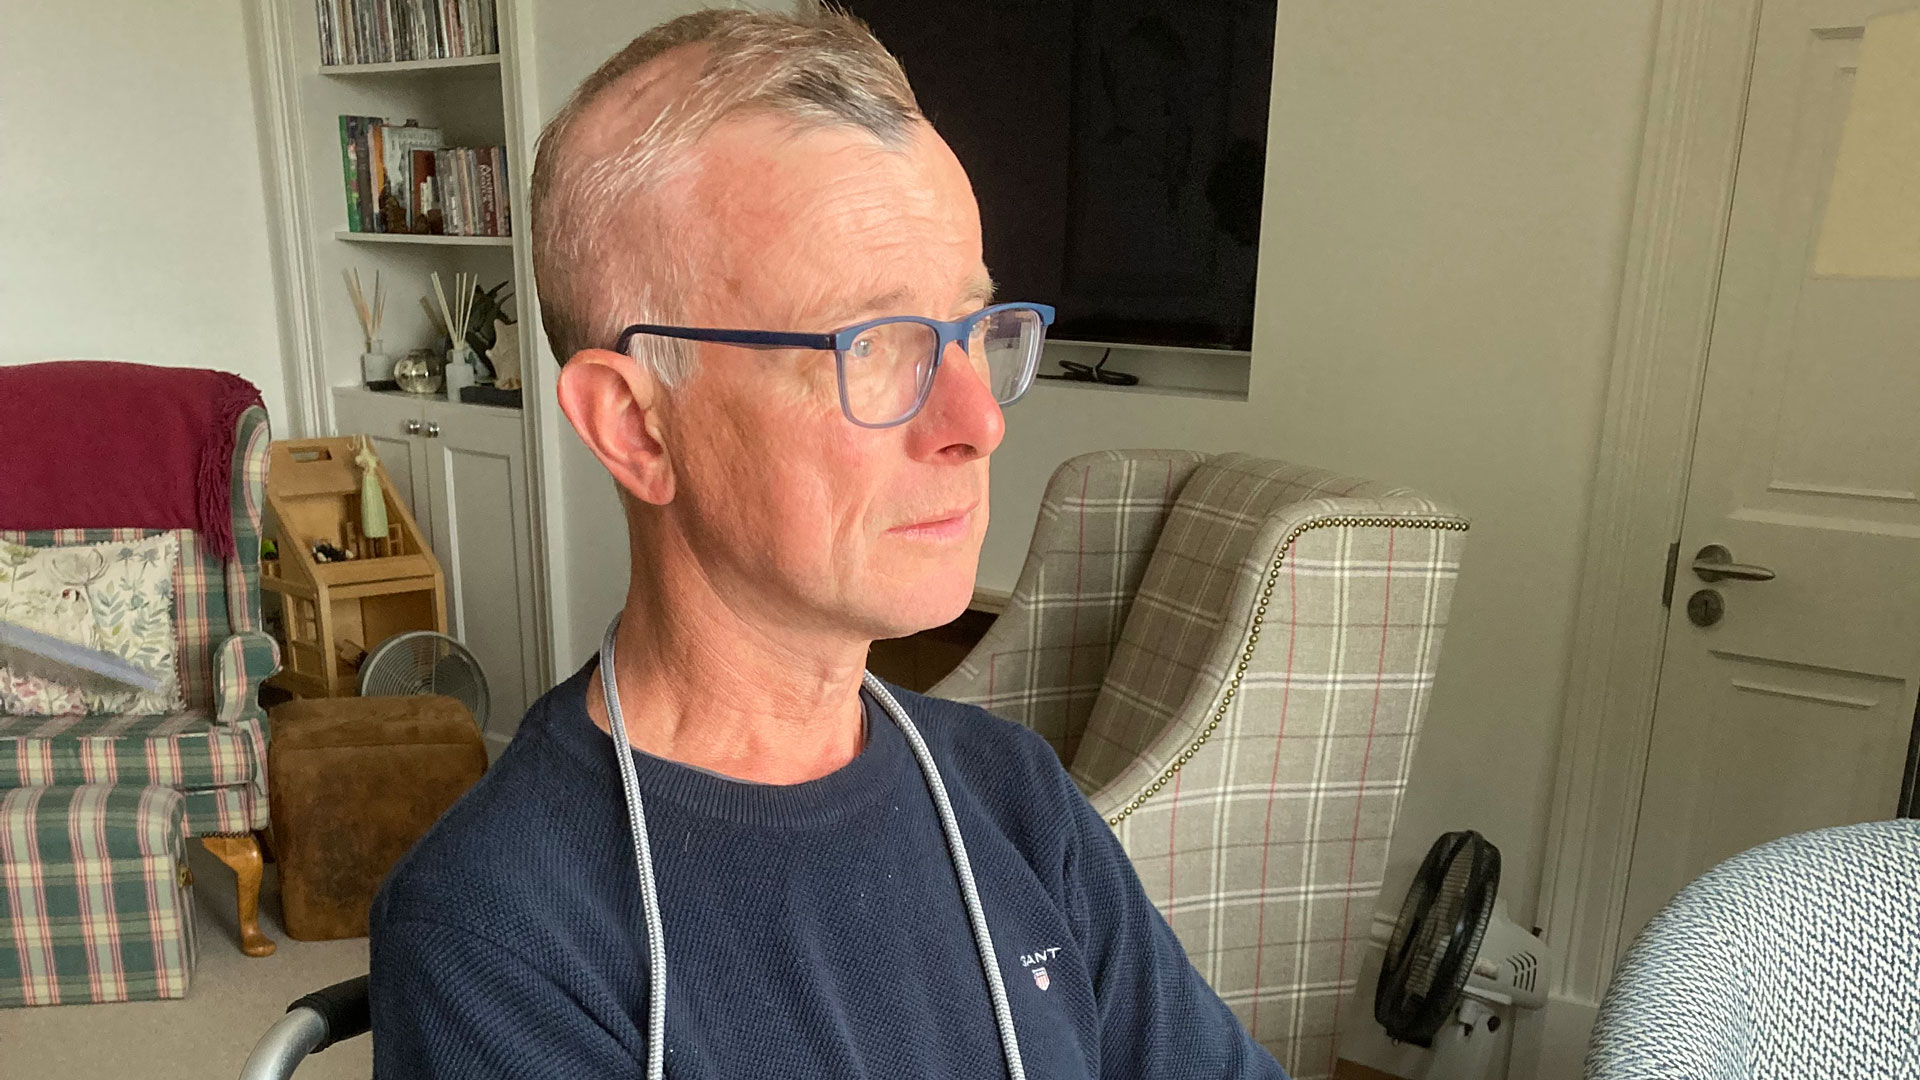 James Fairweather is fighting to raise funds for brain cancer research as he faces the disease himself. Photo: courtesy of James Fairweather and family